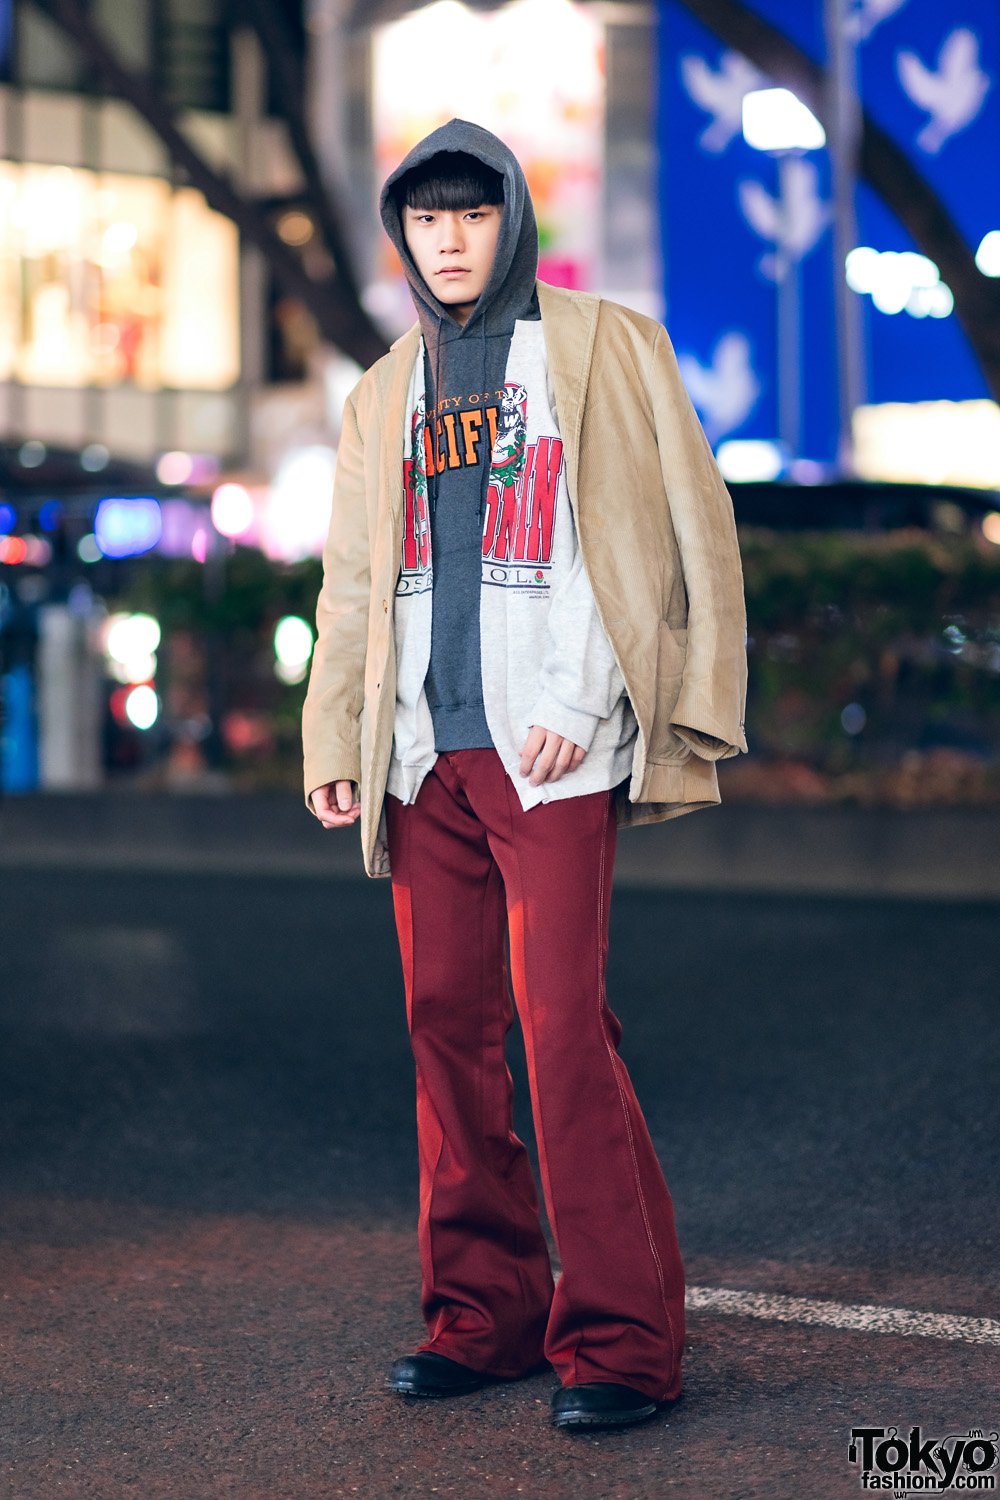 Tokyo Layered Street Style w/ Corduroy Blazer, University of the Pacific Hoodie, The Elephant Collarless Jacket, Lee Flared Pants & Leather Shoes